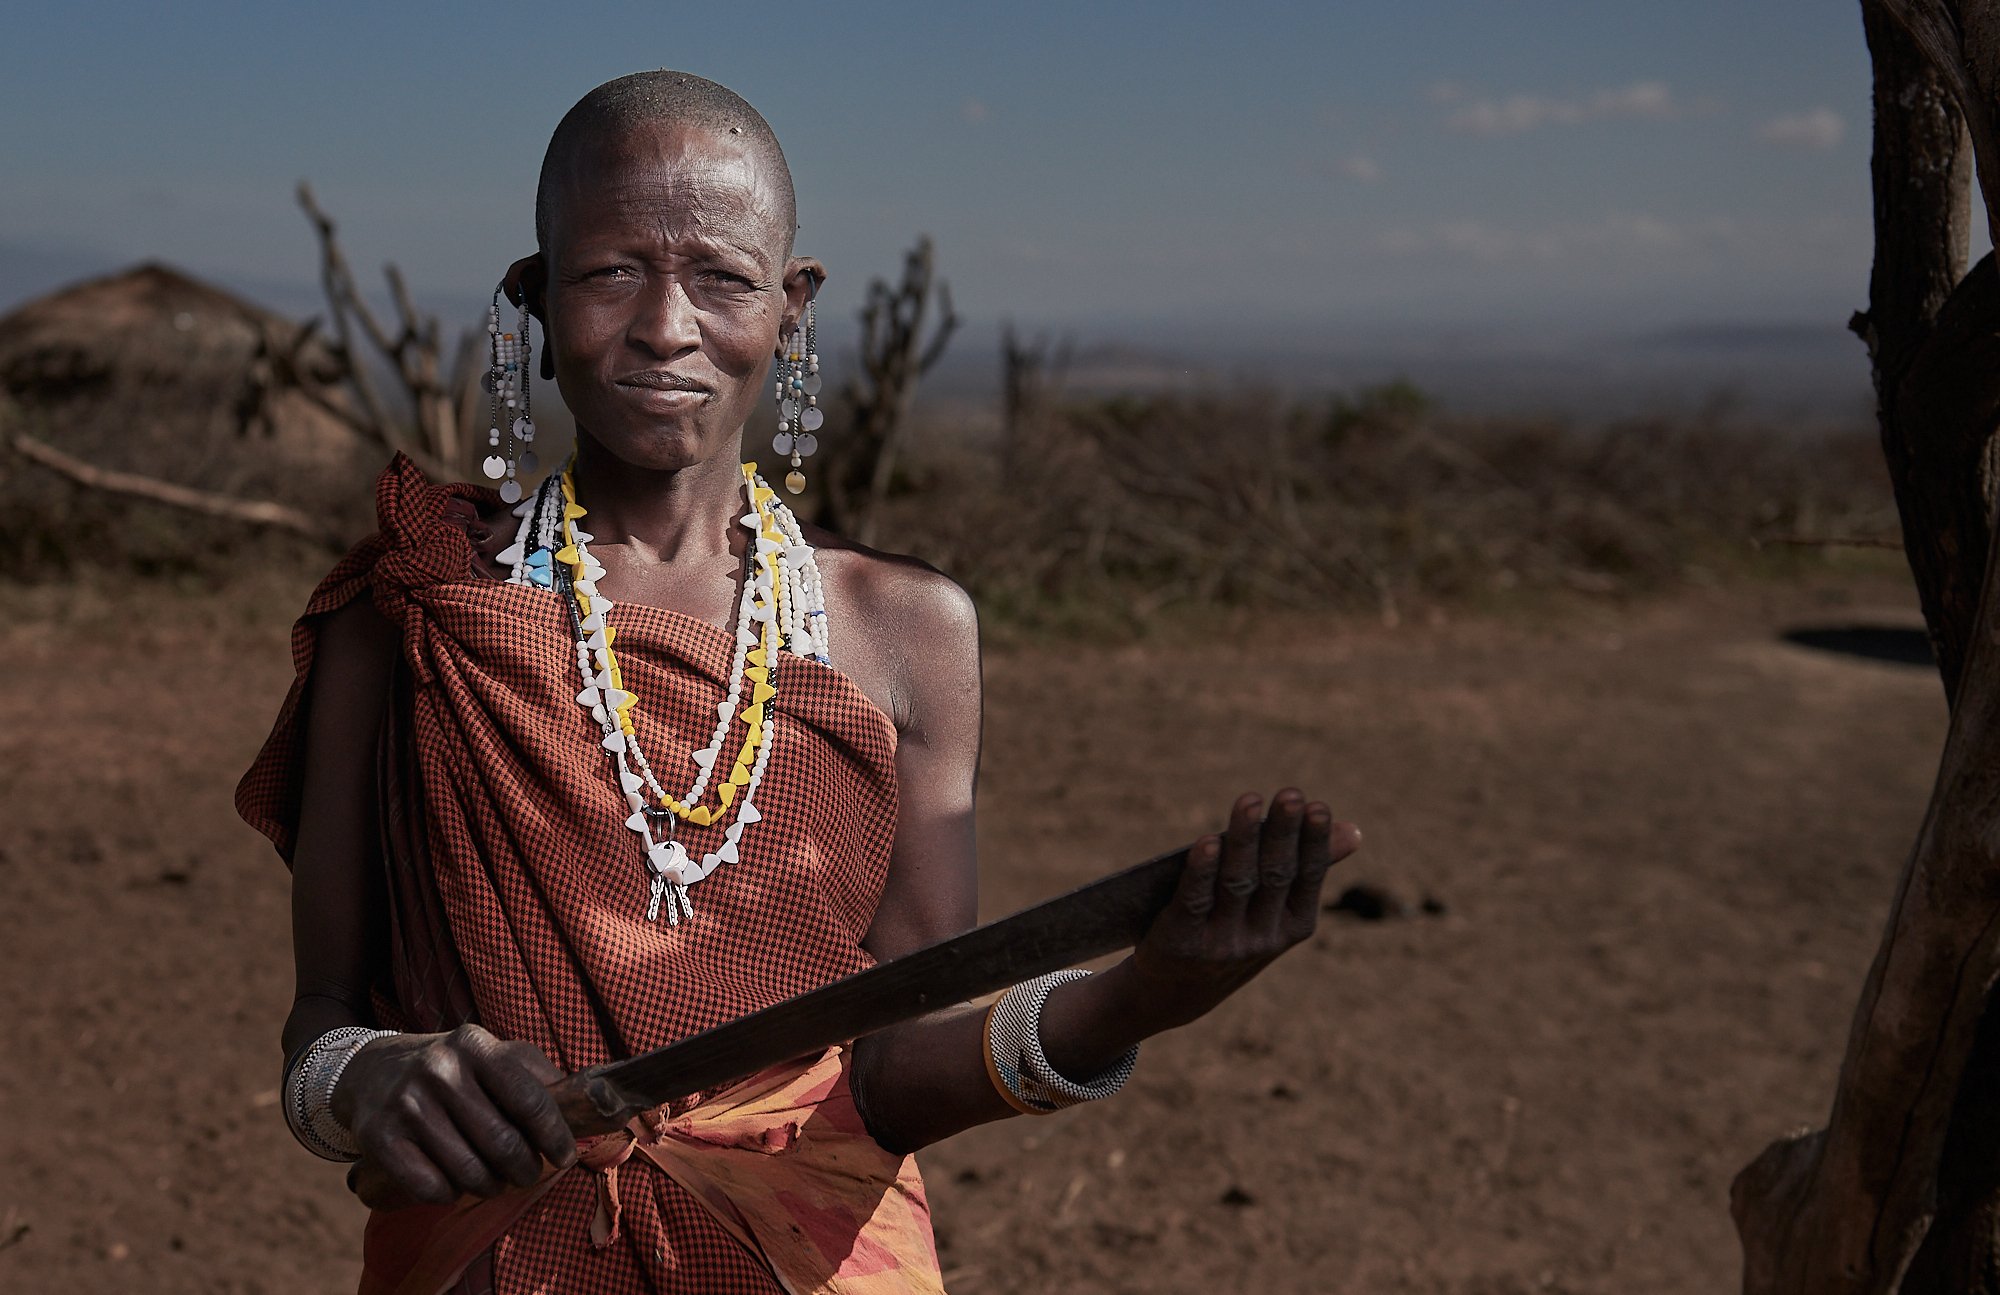 Maasai female warrior - while relatively unknown, the Maasai are one of the few tribes who have female warriors